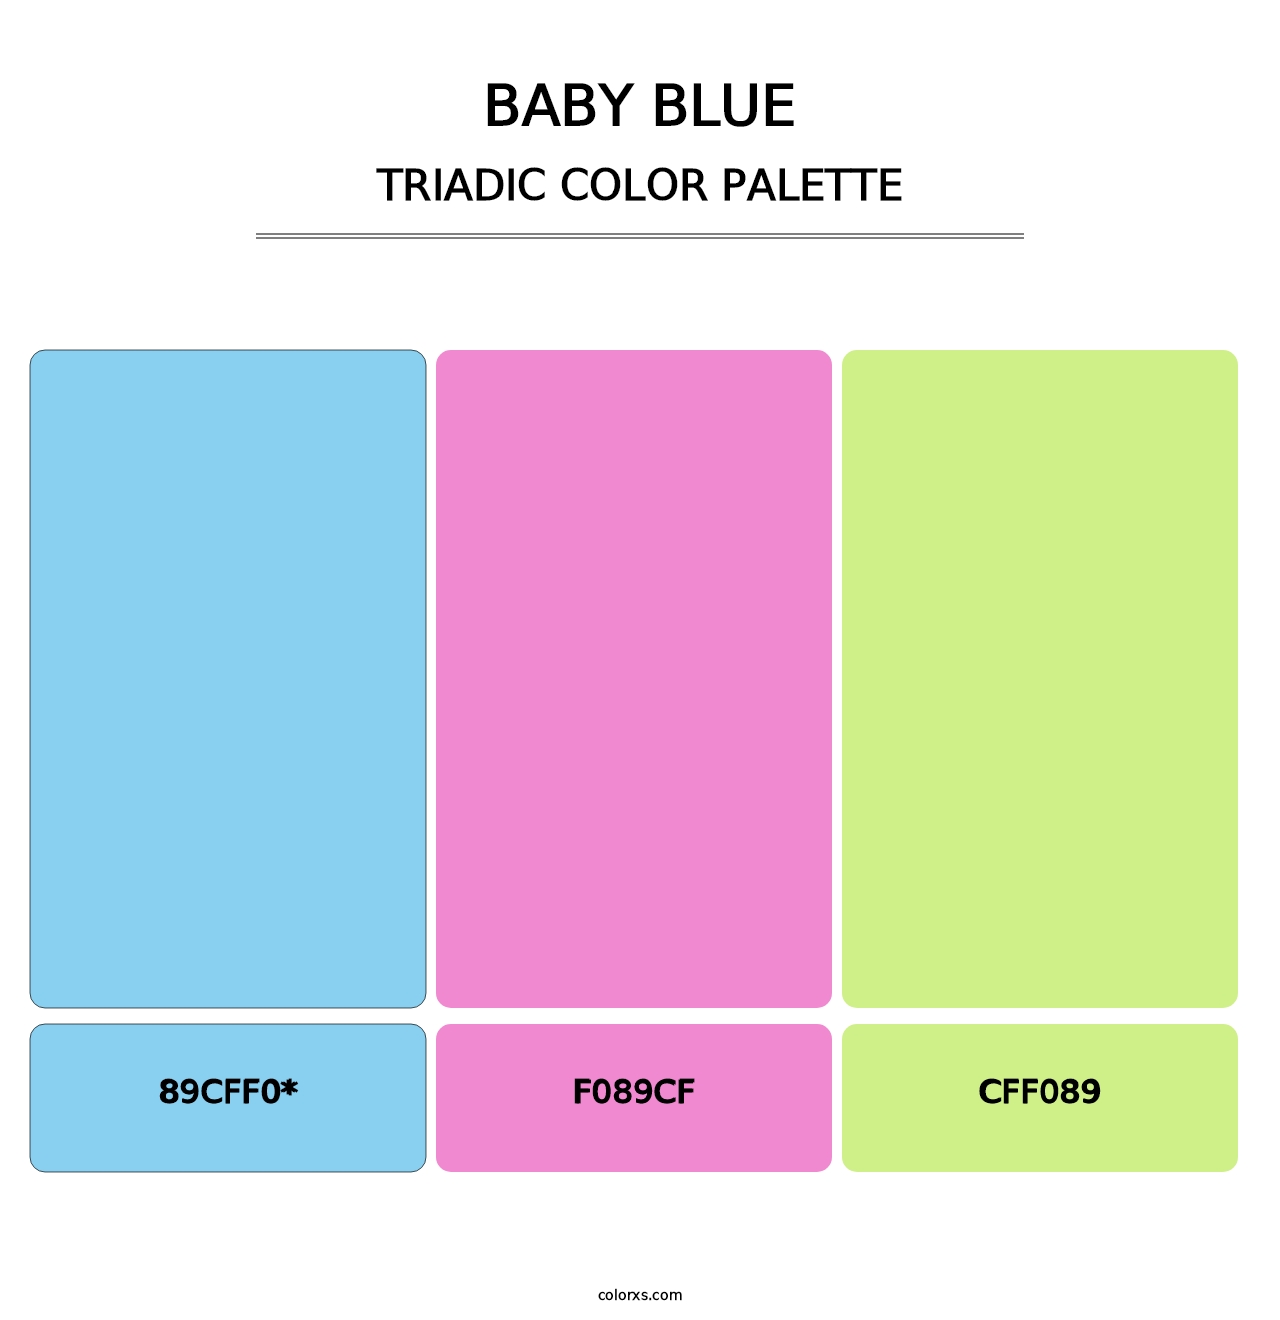 Baby Blue - Triadic Color Palette